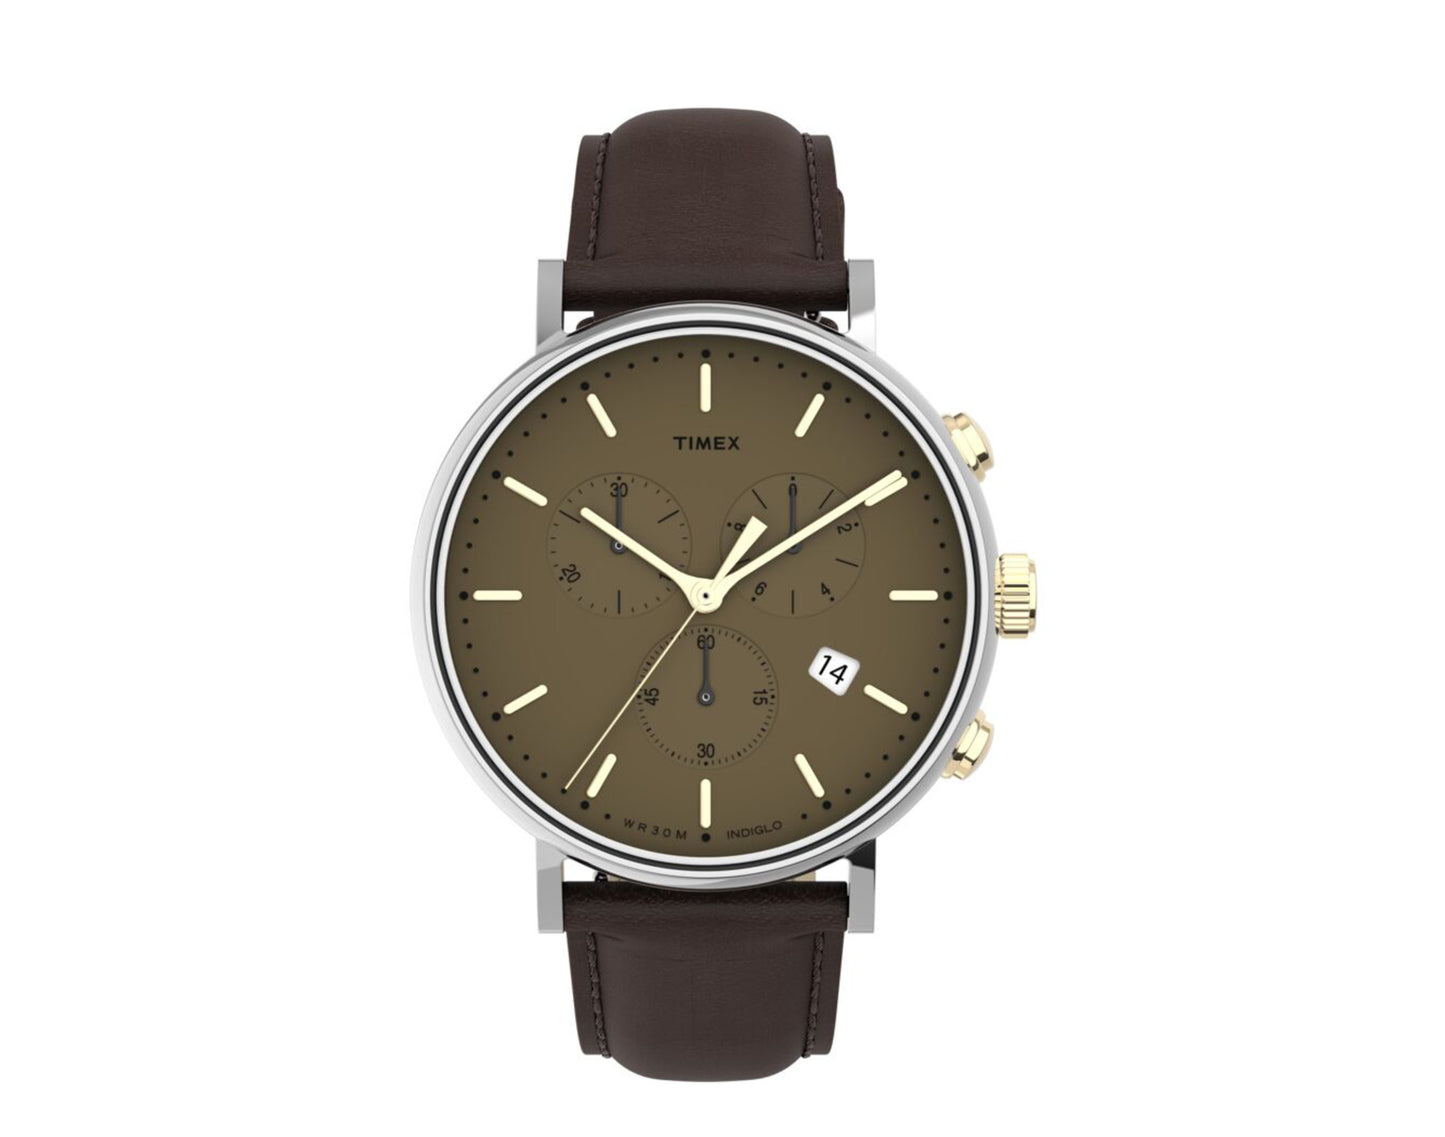 Timex Fairfield Chronograph 41mm Leather Strap Watch